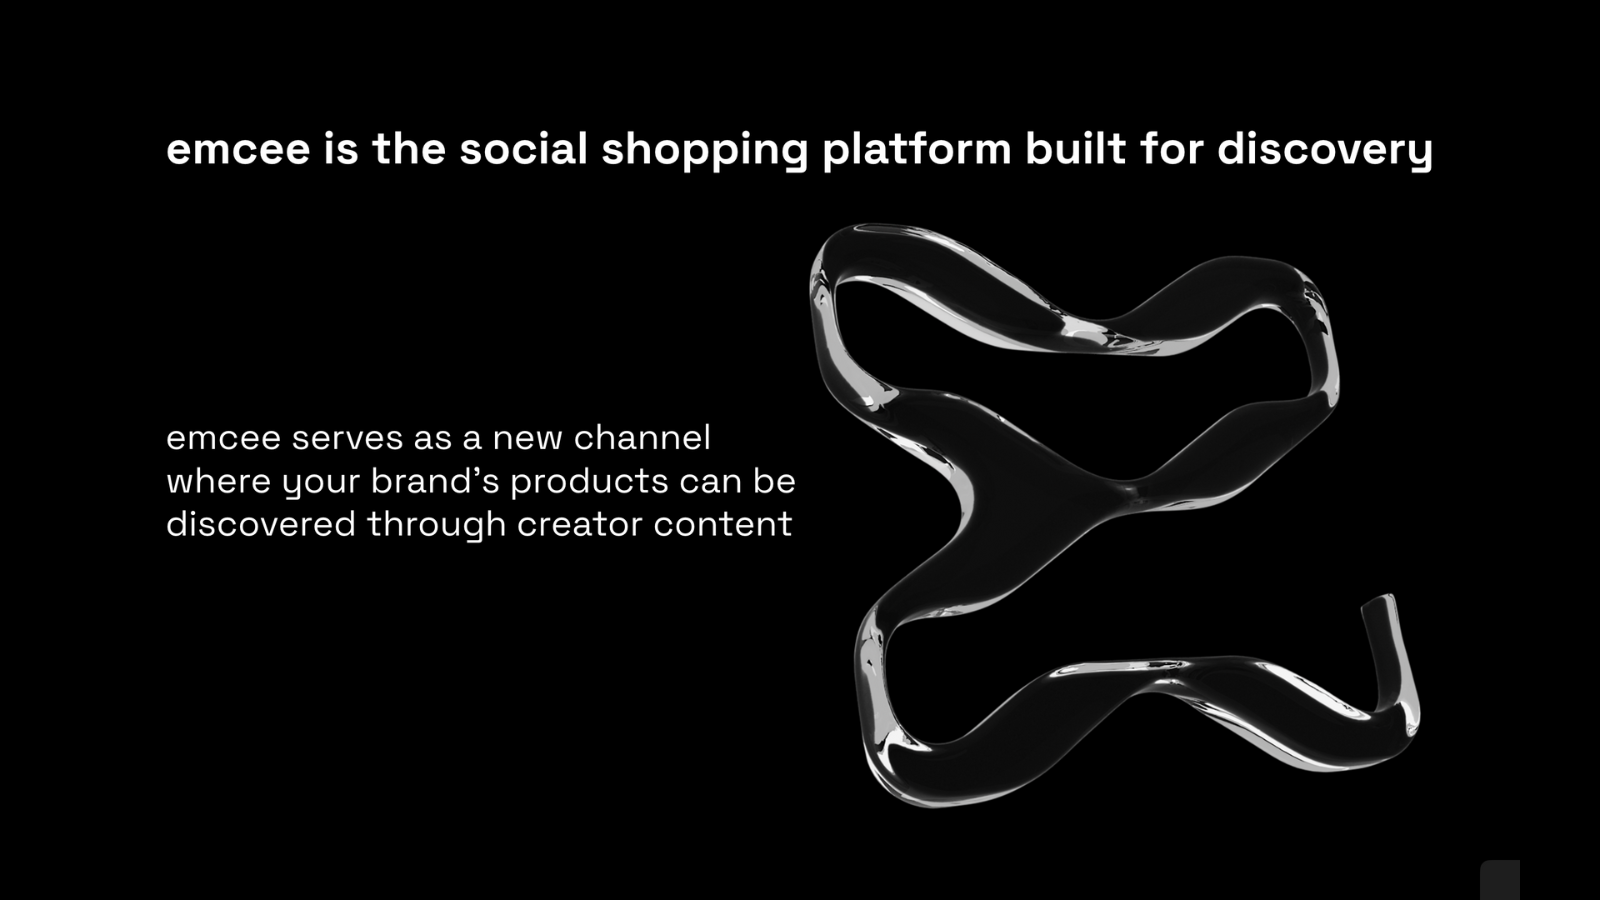 emcee is the social shopping platform built for discovery